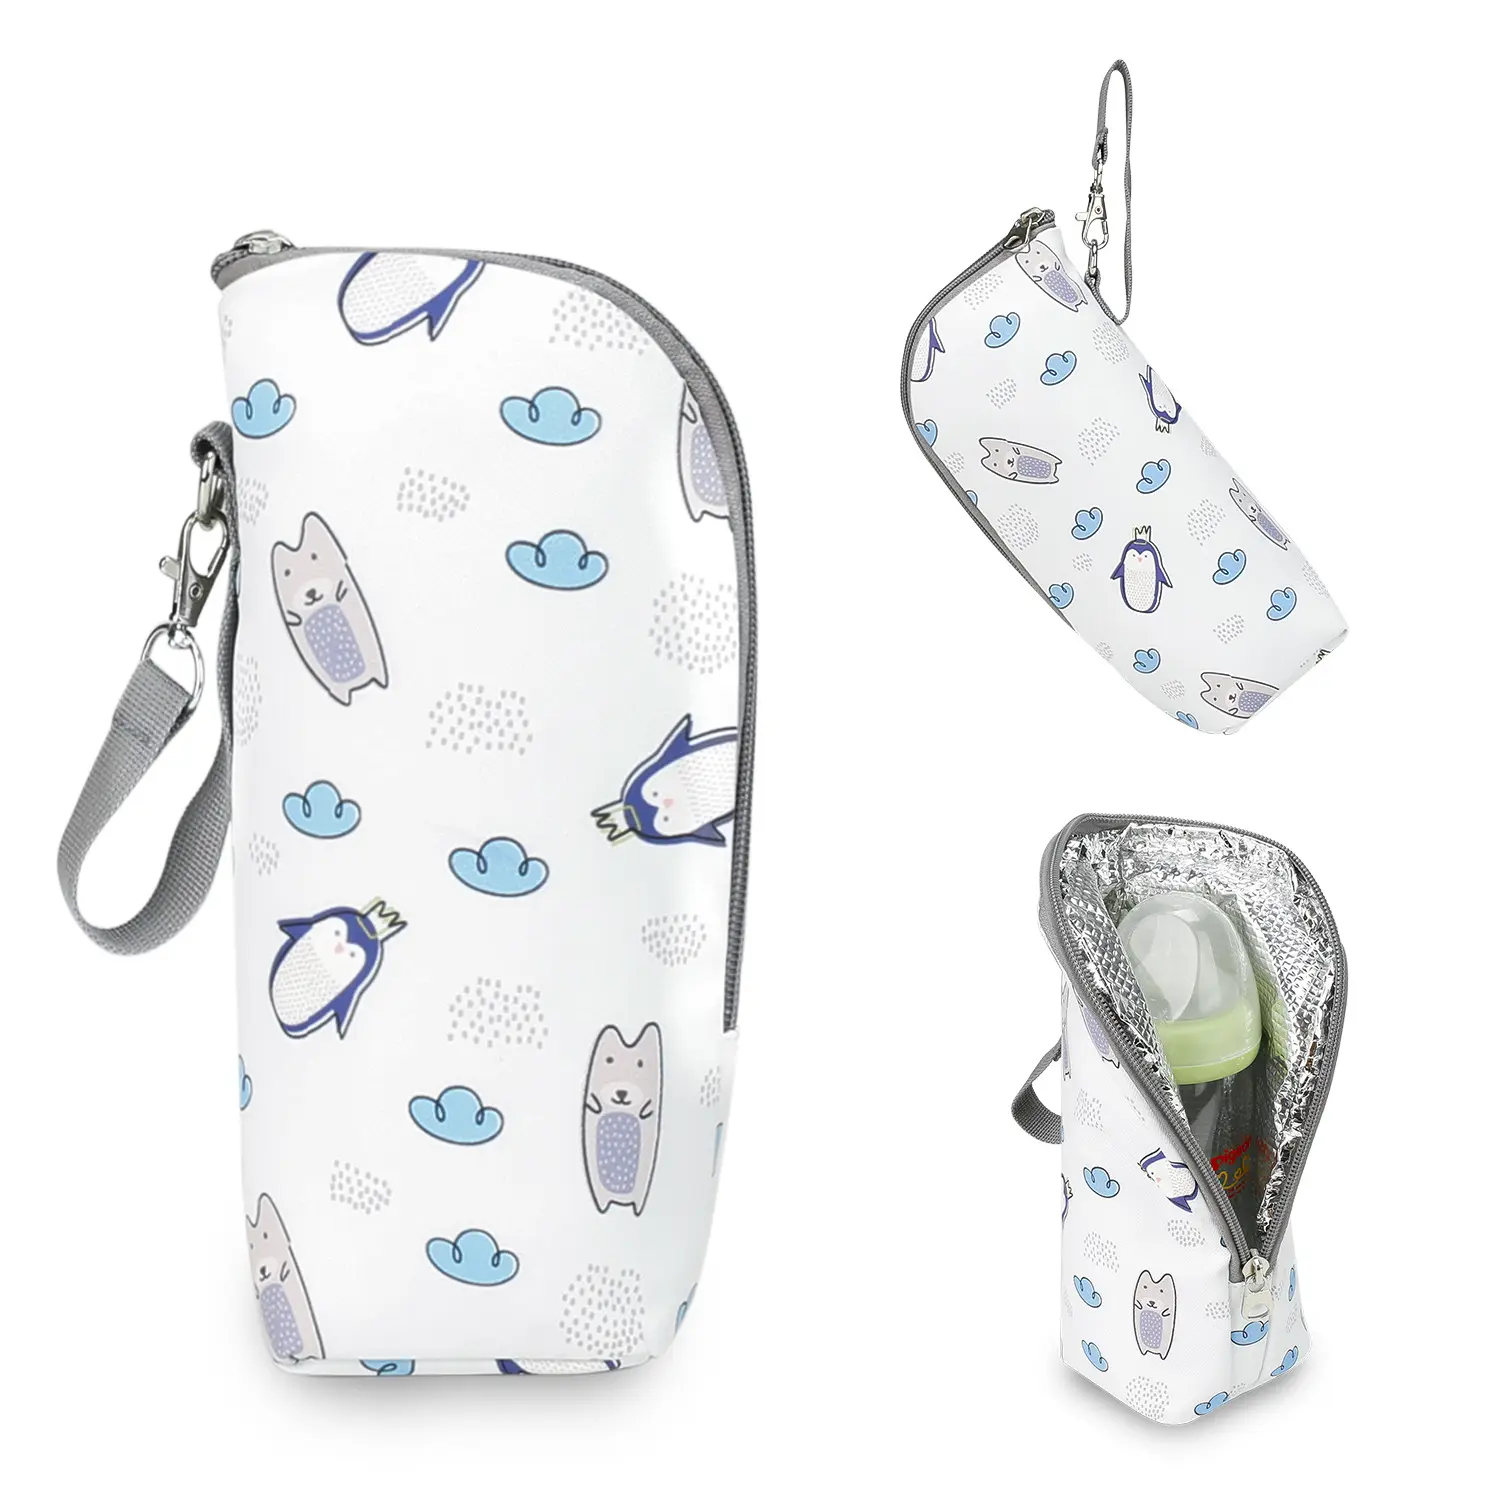 Aluminum Foil Thermal Baby Bottle Mommy Bag Accessories Diaper Bag Insulated Portable Breastmilk Cooler Bag